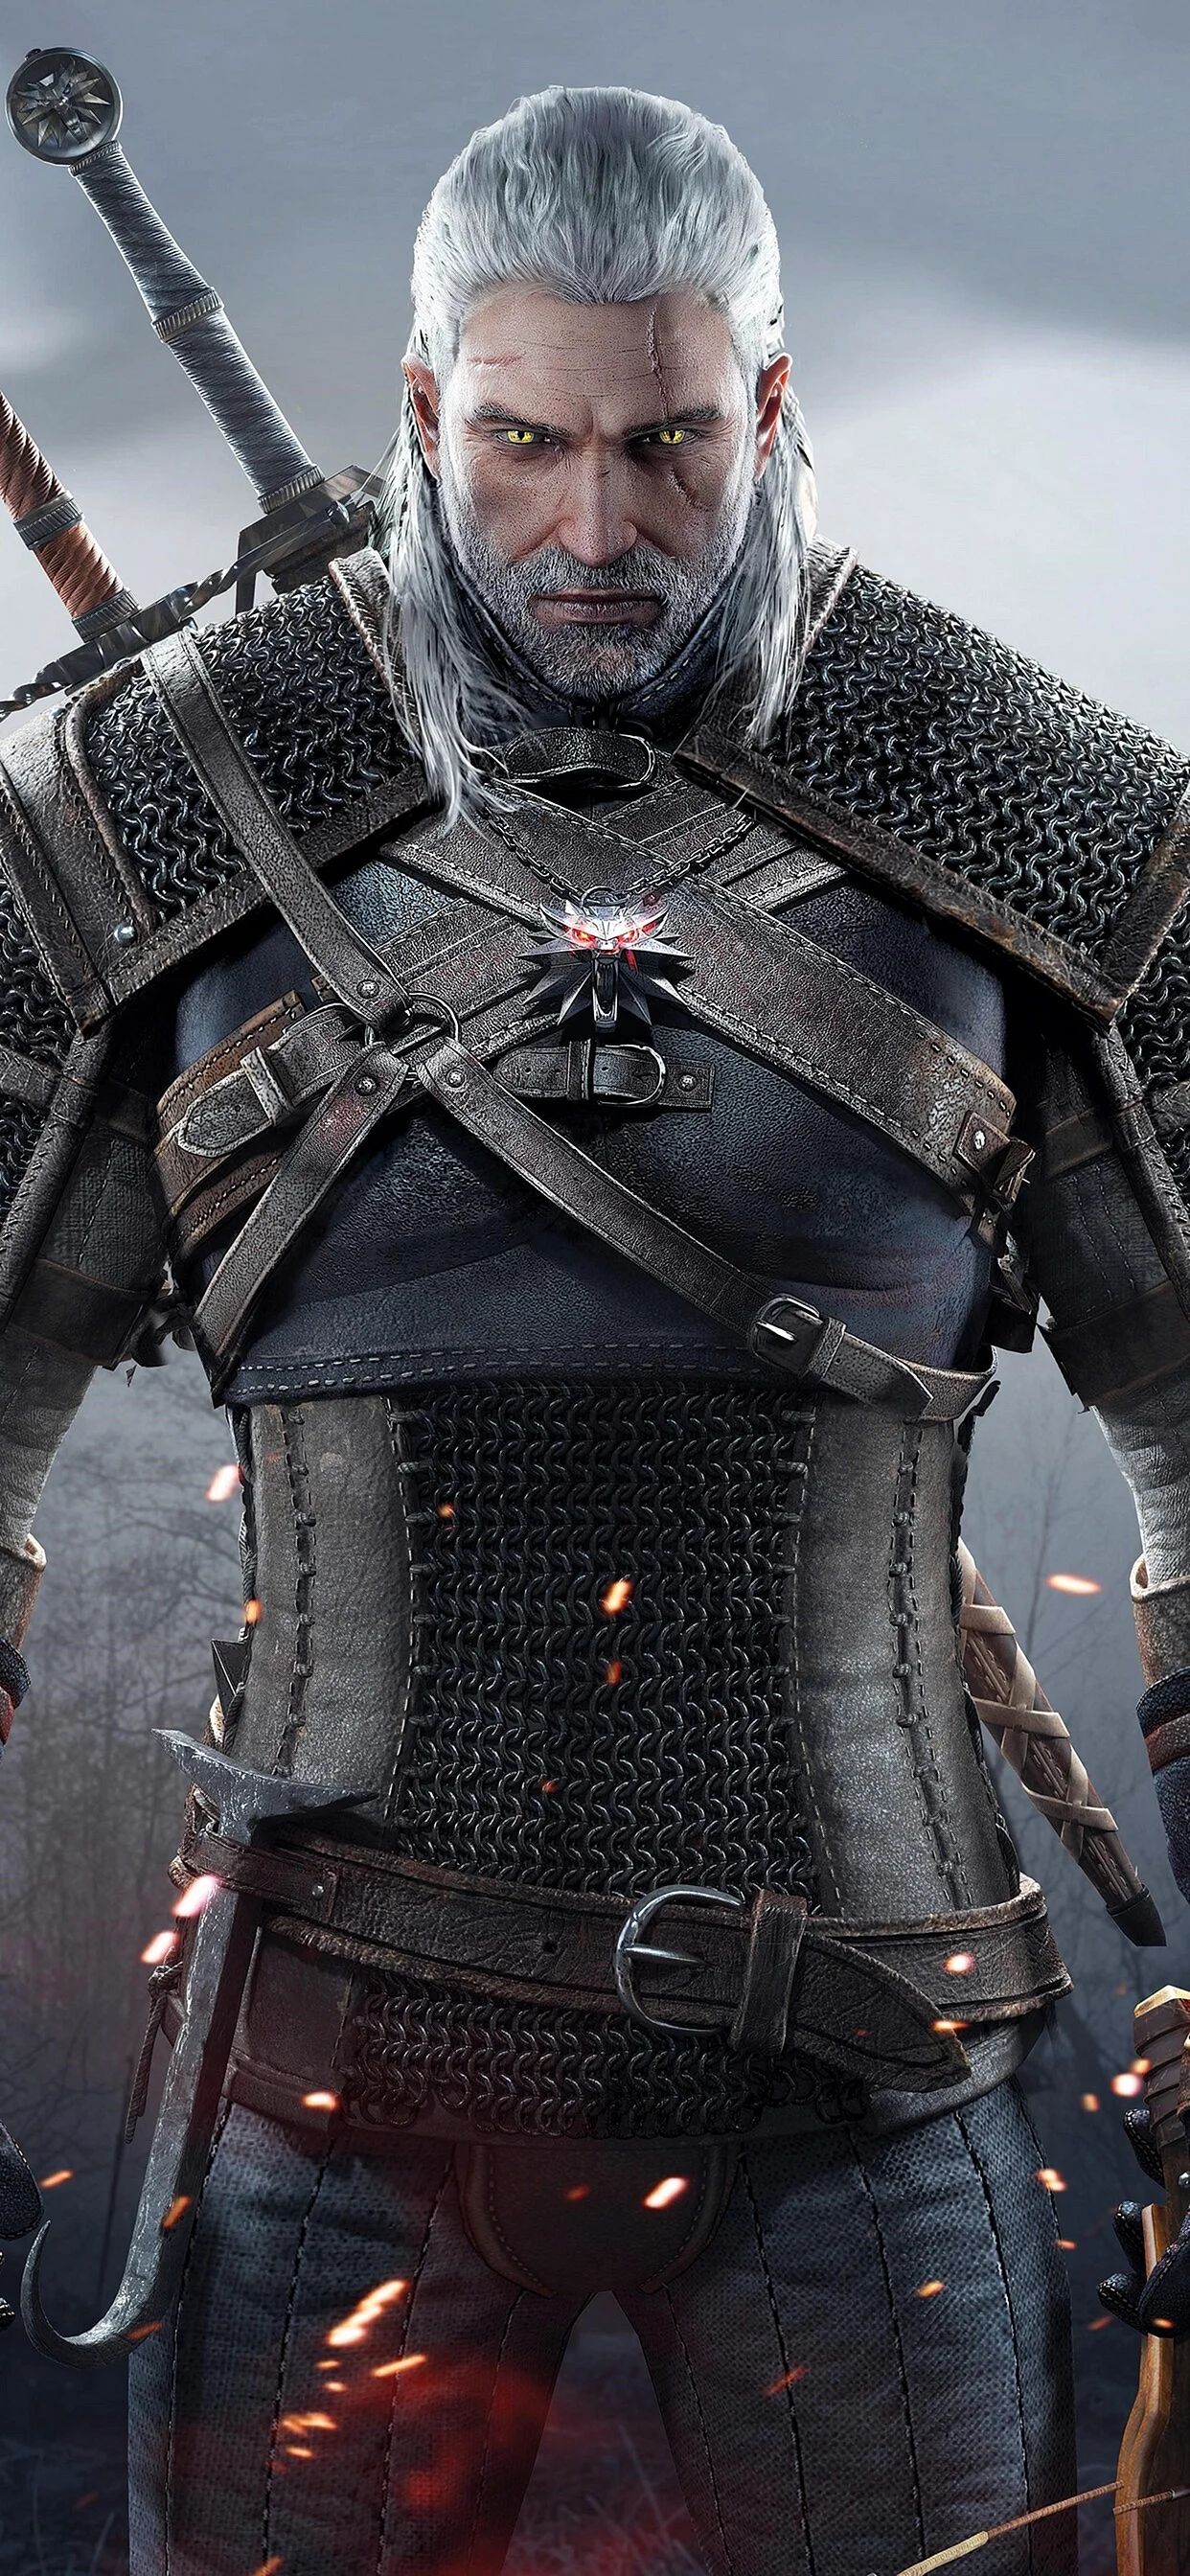 Witcher 3 Geralt Wallpaper for iPhone 11 Pro Max